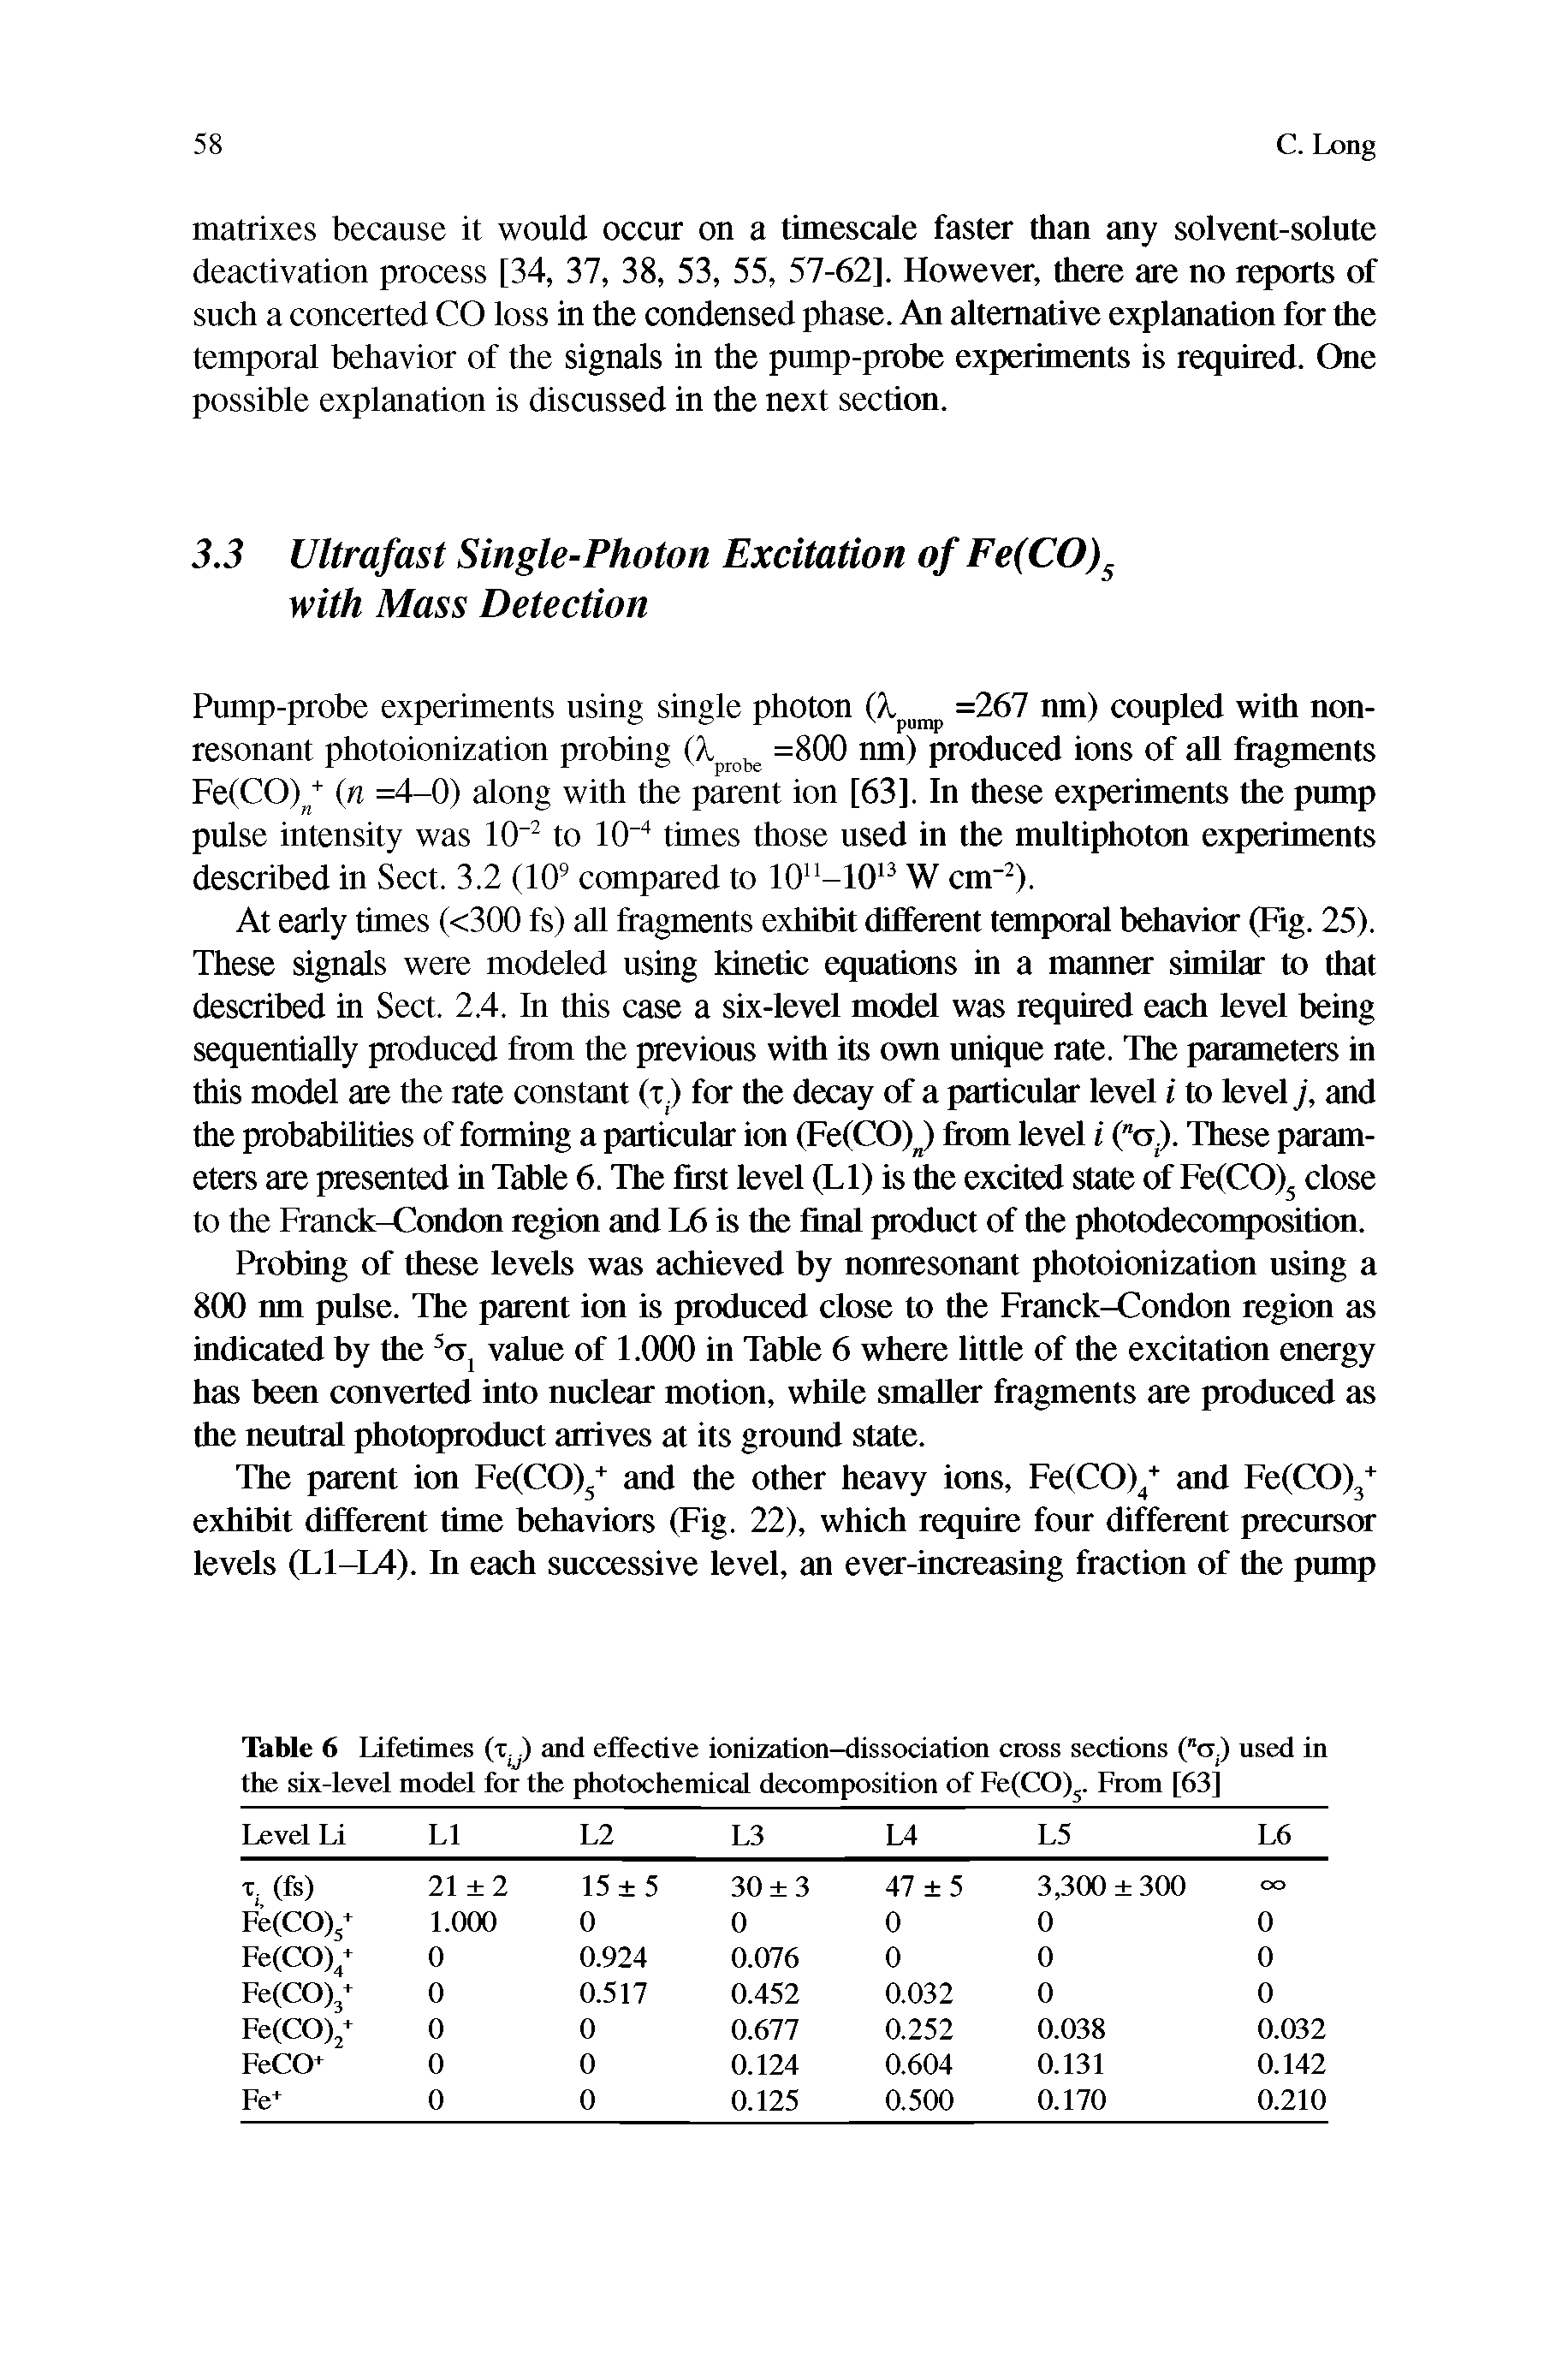 Table 6 Lifetimes (xy) and effective ionization-dissociation cross sections ( <x) used in the six-level model for the photochemical decomposition of Fe(CO)3. From [63]...